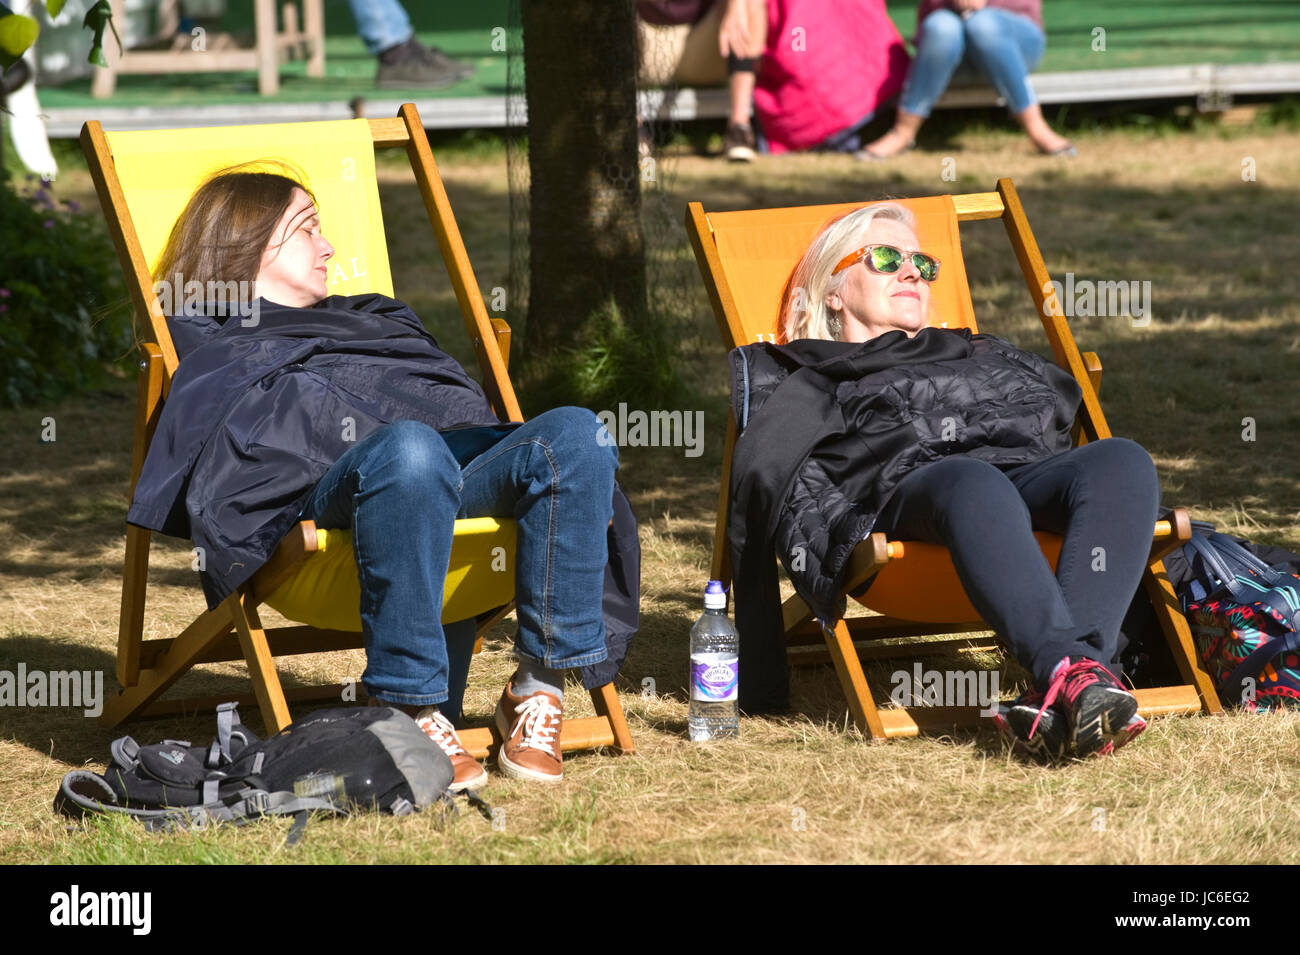 Women asleep in deckchairs at Hay Festival 2017 Hay-on-Wye Powys Wales UK Stock Photo